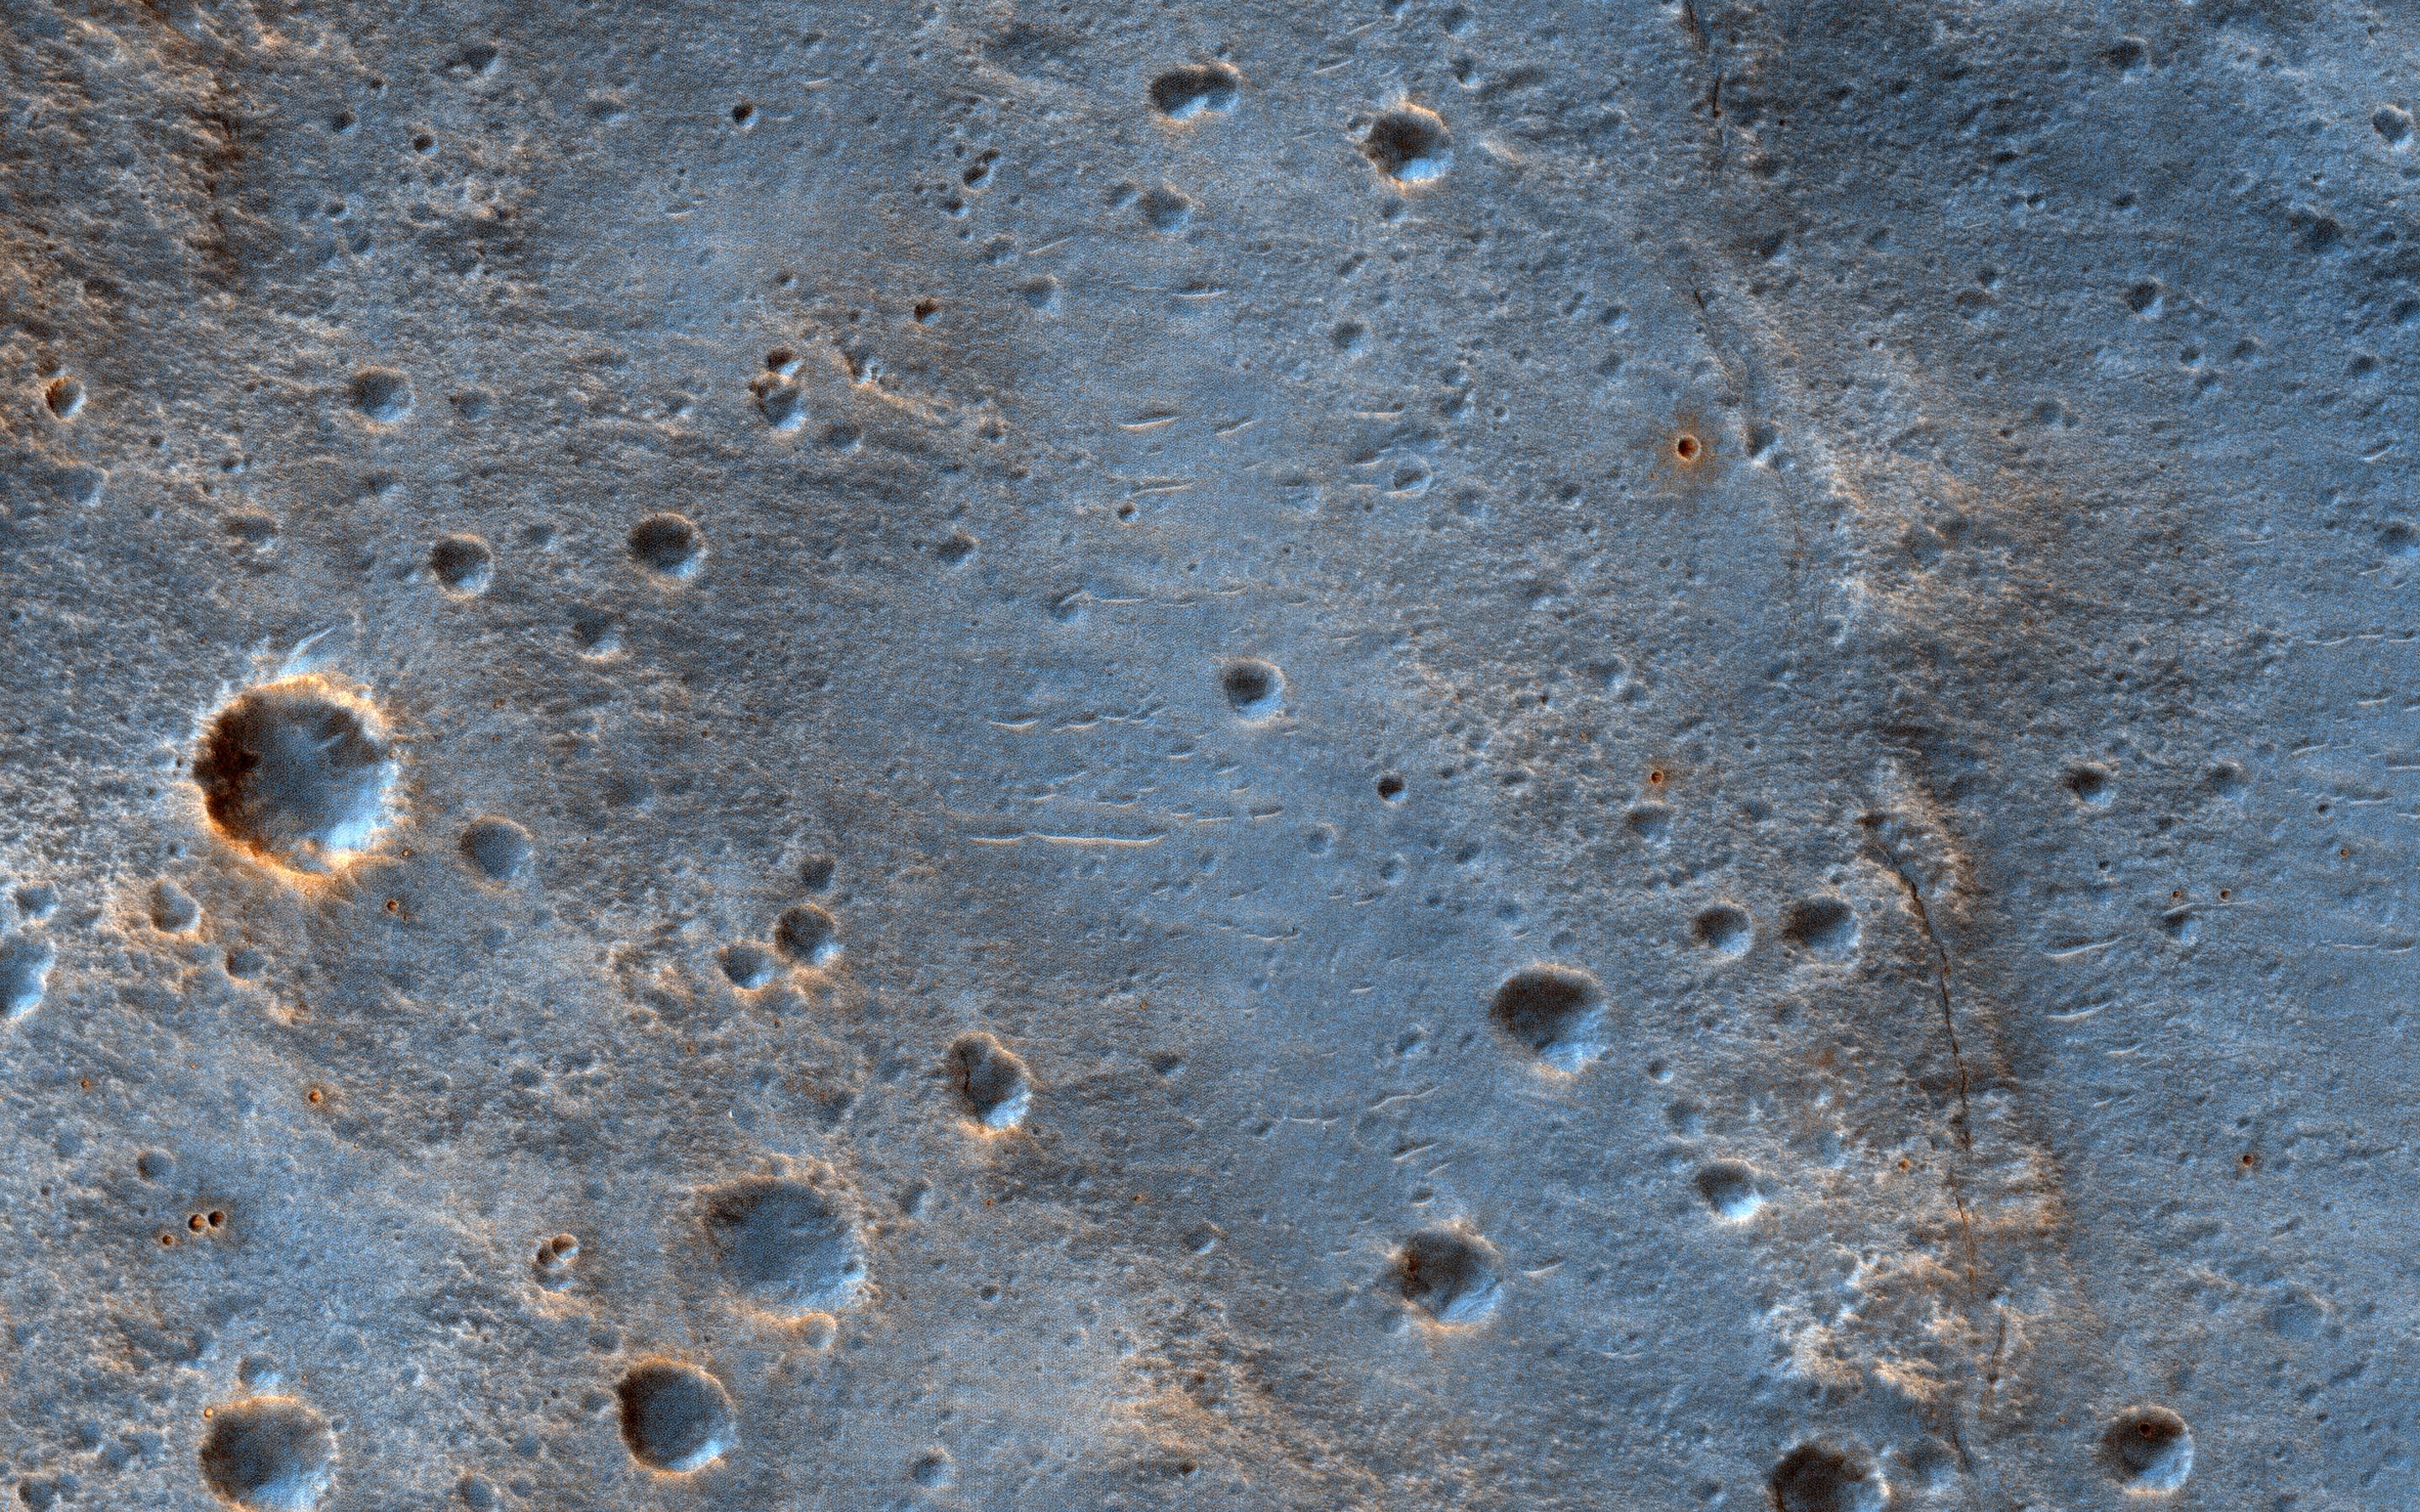 PIA23289: Landing in Oxia Palus